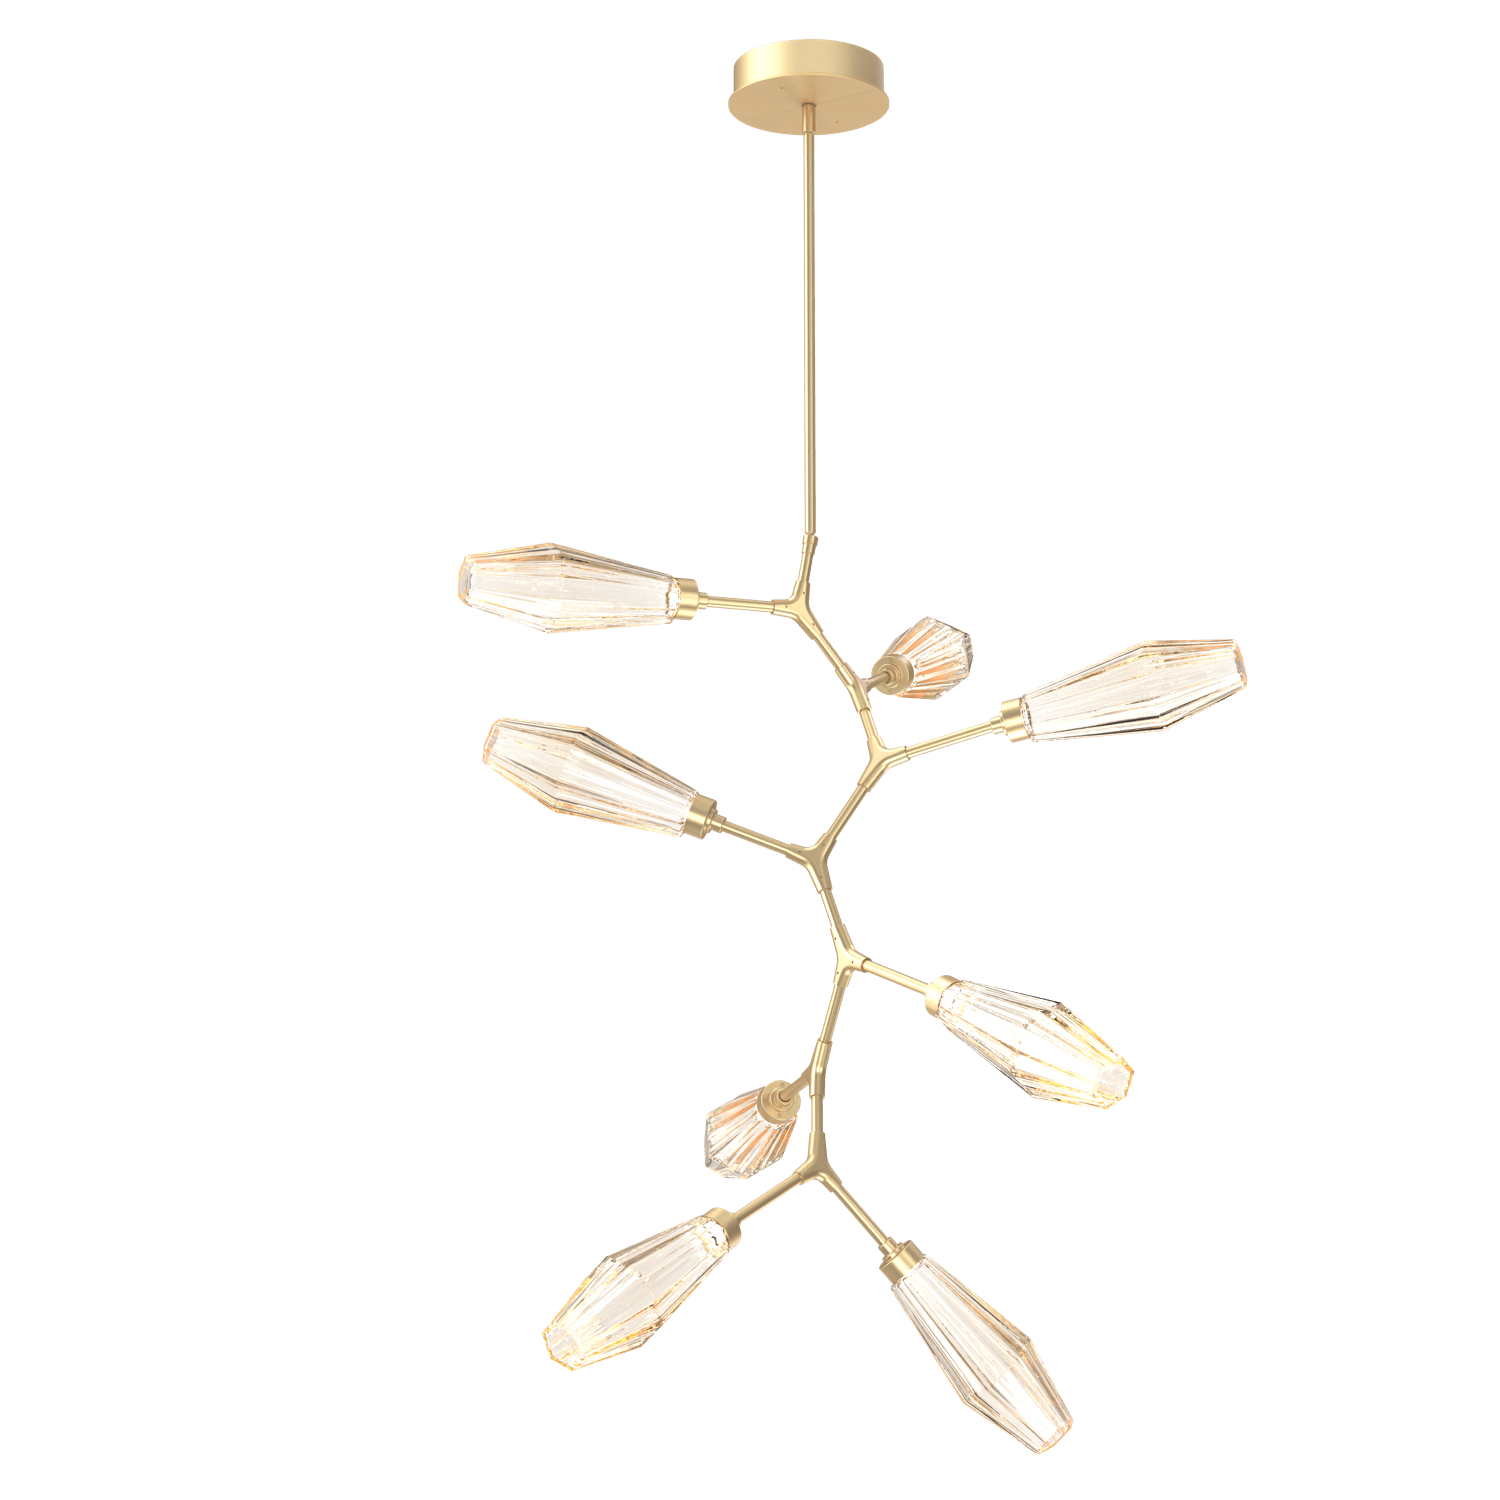 CHB0049-VB-GB-RA-Hammerton-Studio-Aalto-8-light-modern-vine-chandelier-with-gilded-brass-finish-and-optic-ribbed-amber-glass-shades-and-LED-lamping